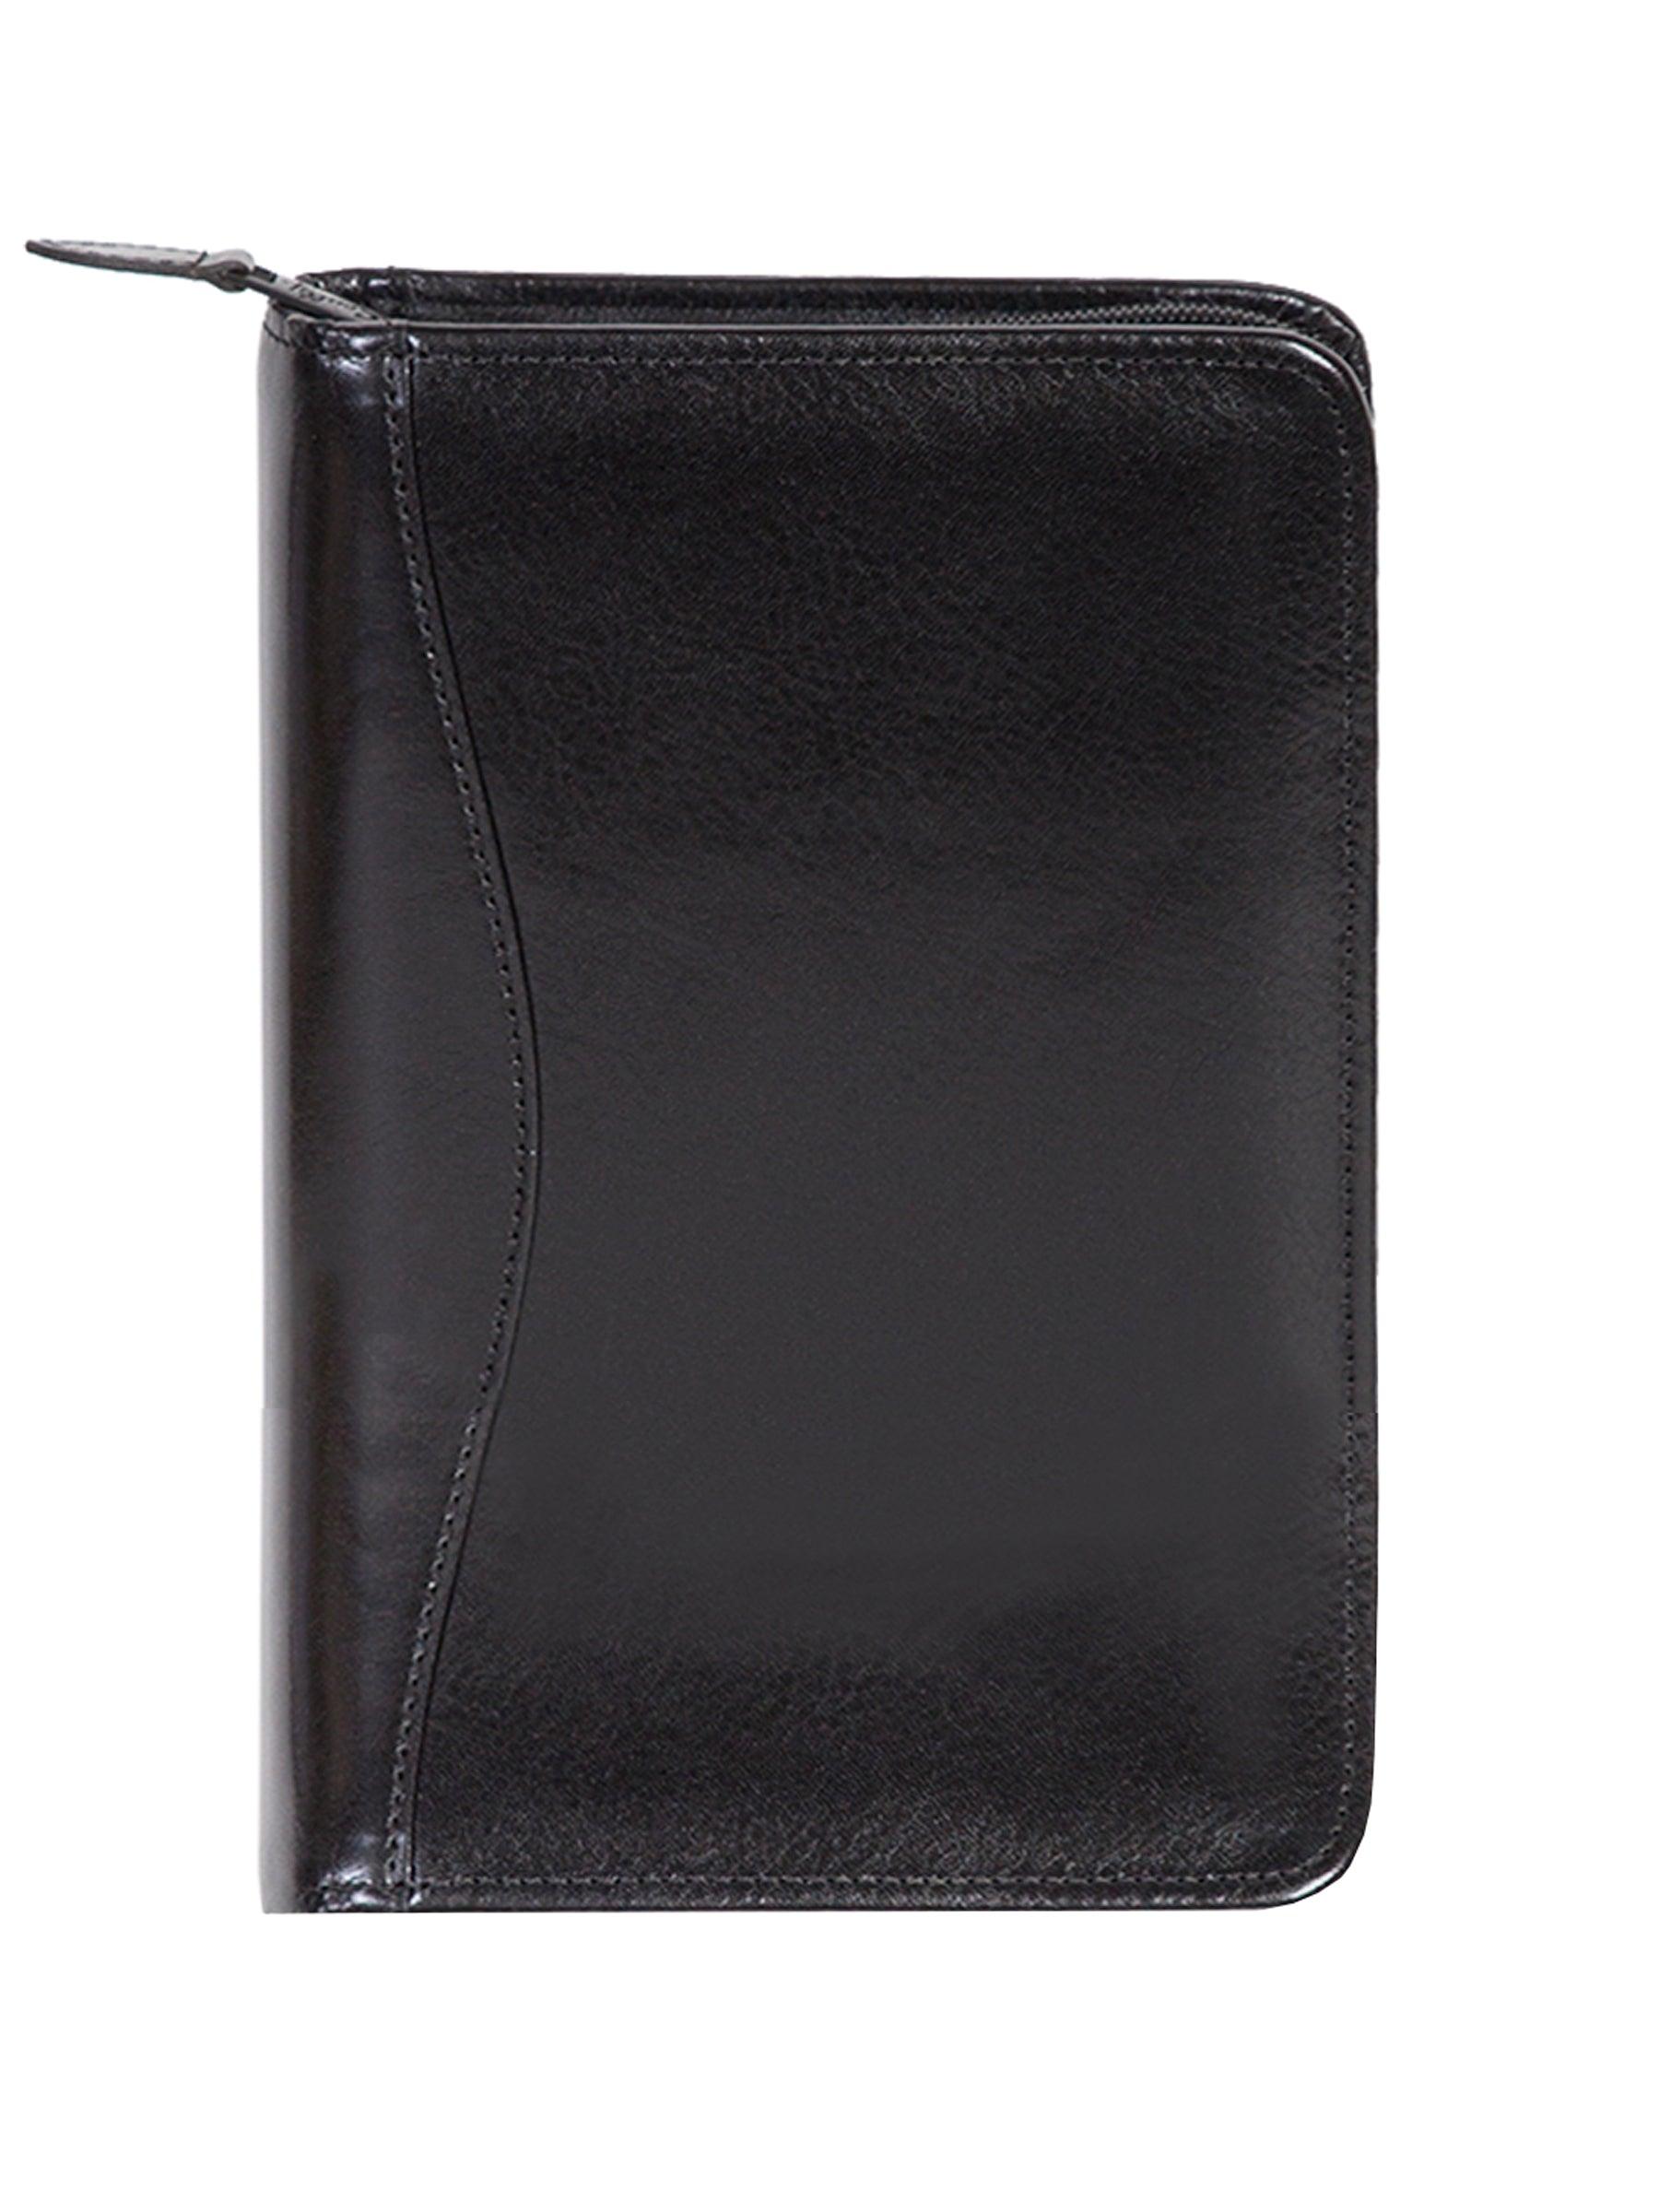 Scully Leather Black Italian Leather Junior Zip Padfolio - Flyclothing LLC